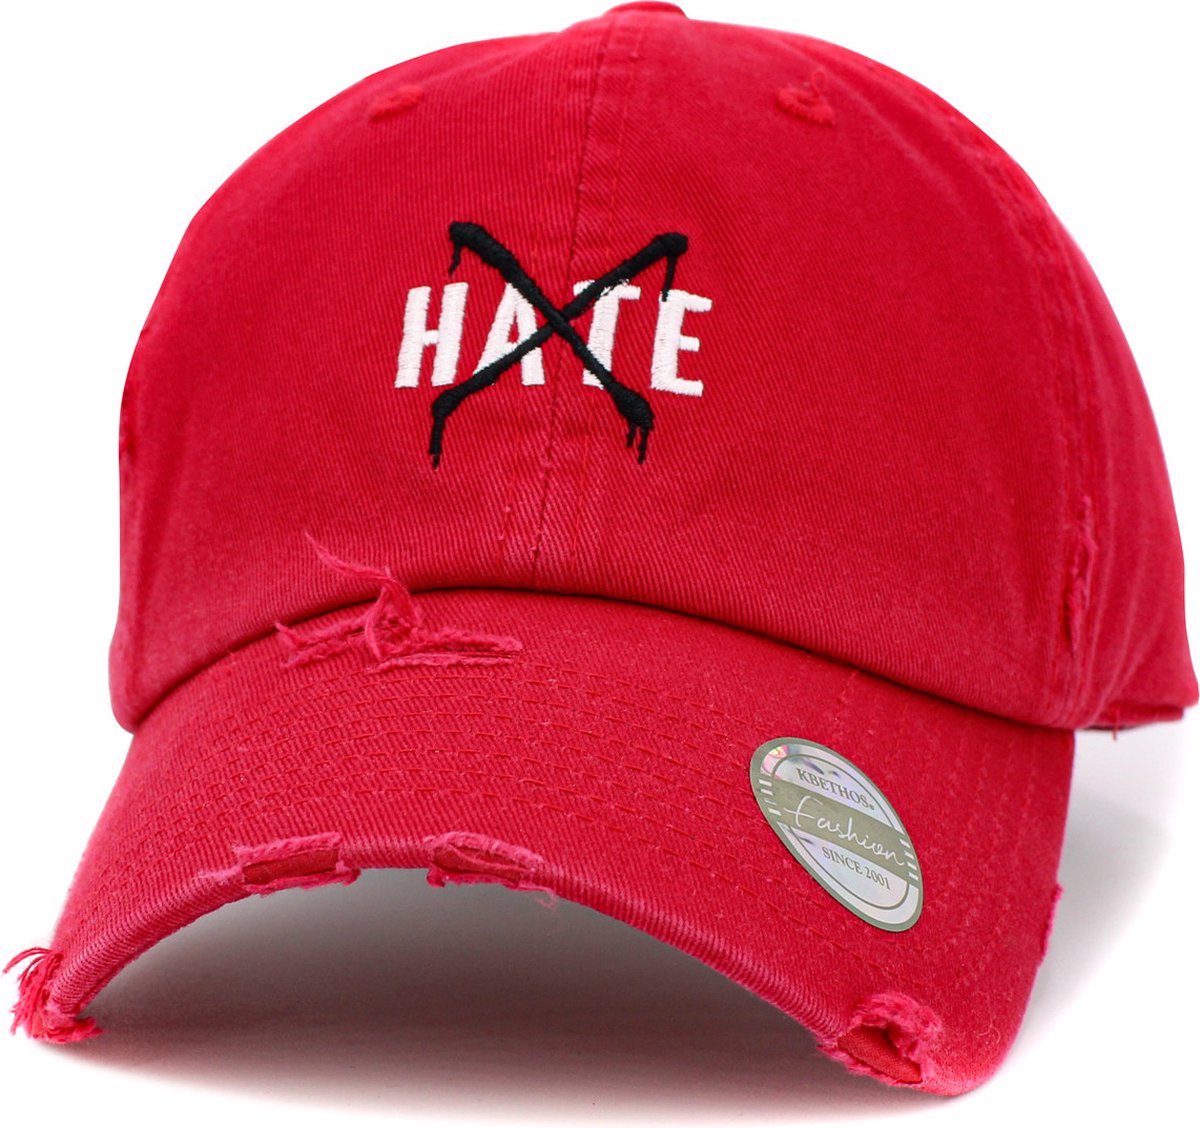 KB-ETHOS® Baseball Cap - KB3045 RED - No Hate - Distressed Washed - One Size - Rood